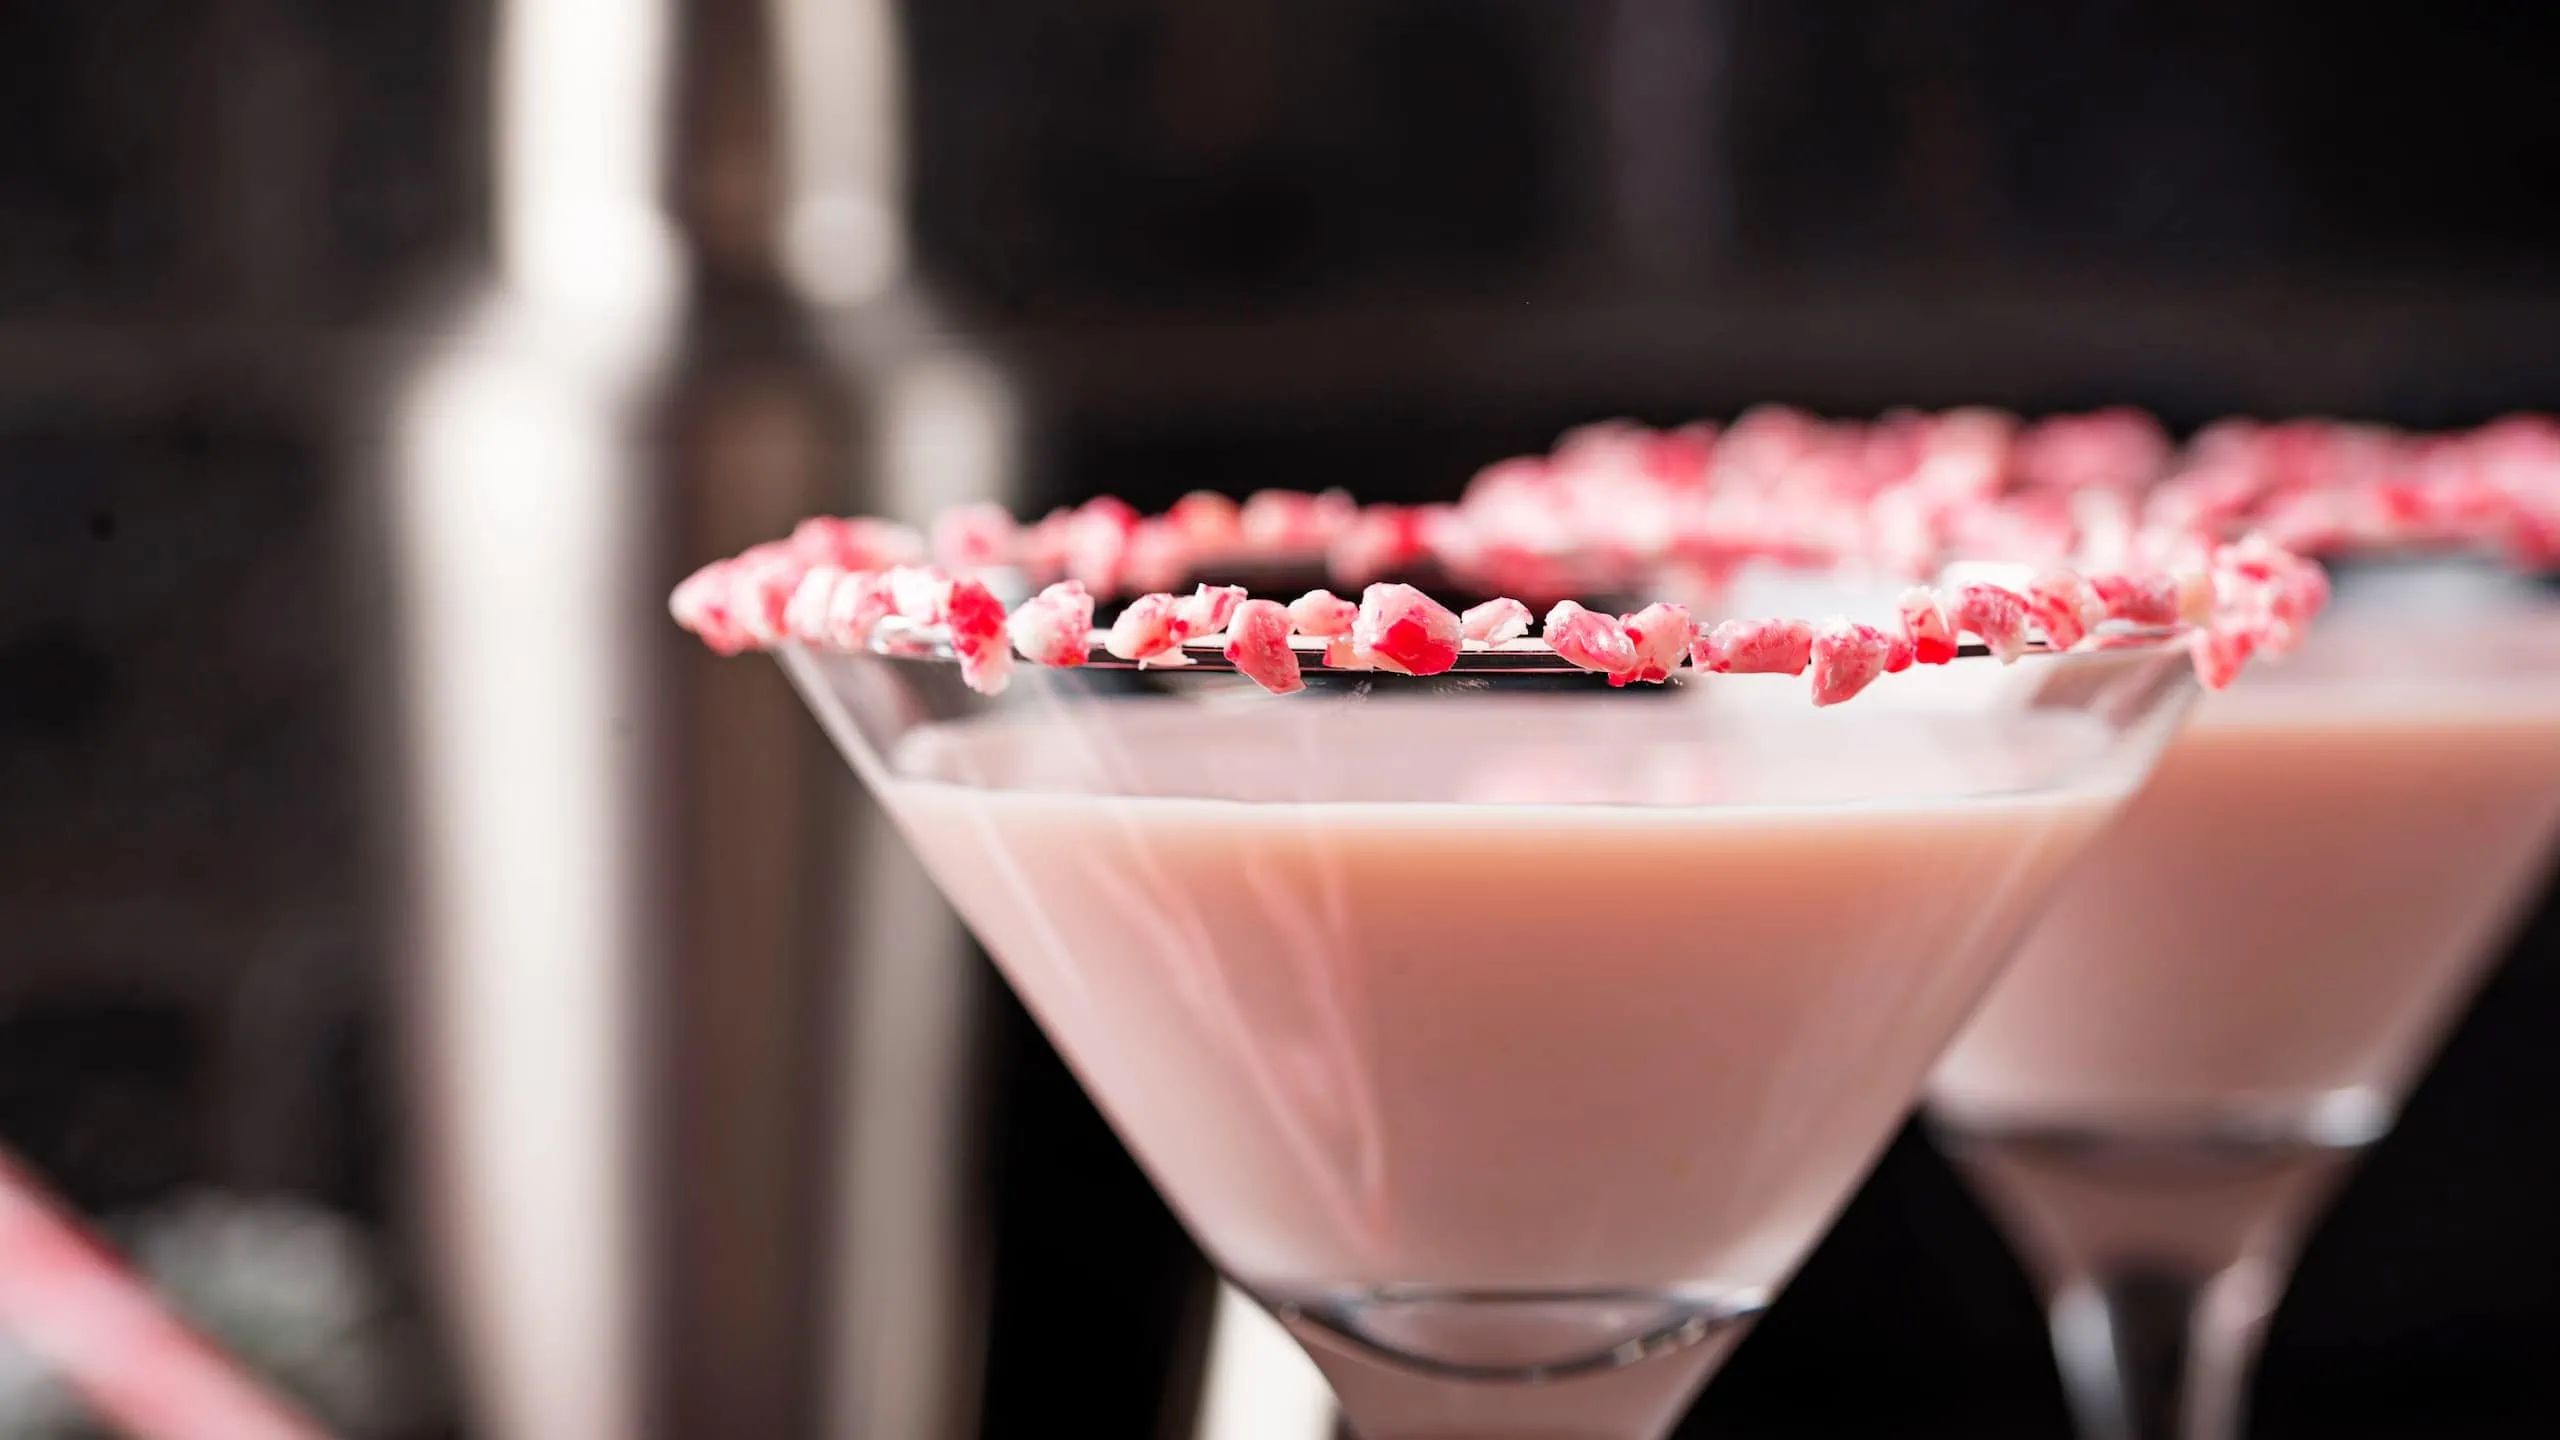 Our version of RumChata's peppermint bark recipe